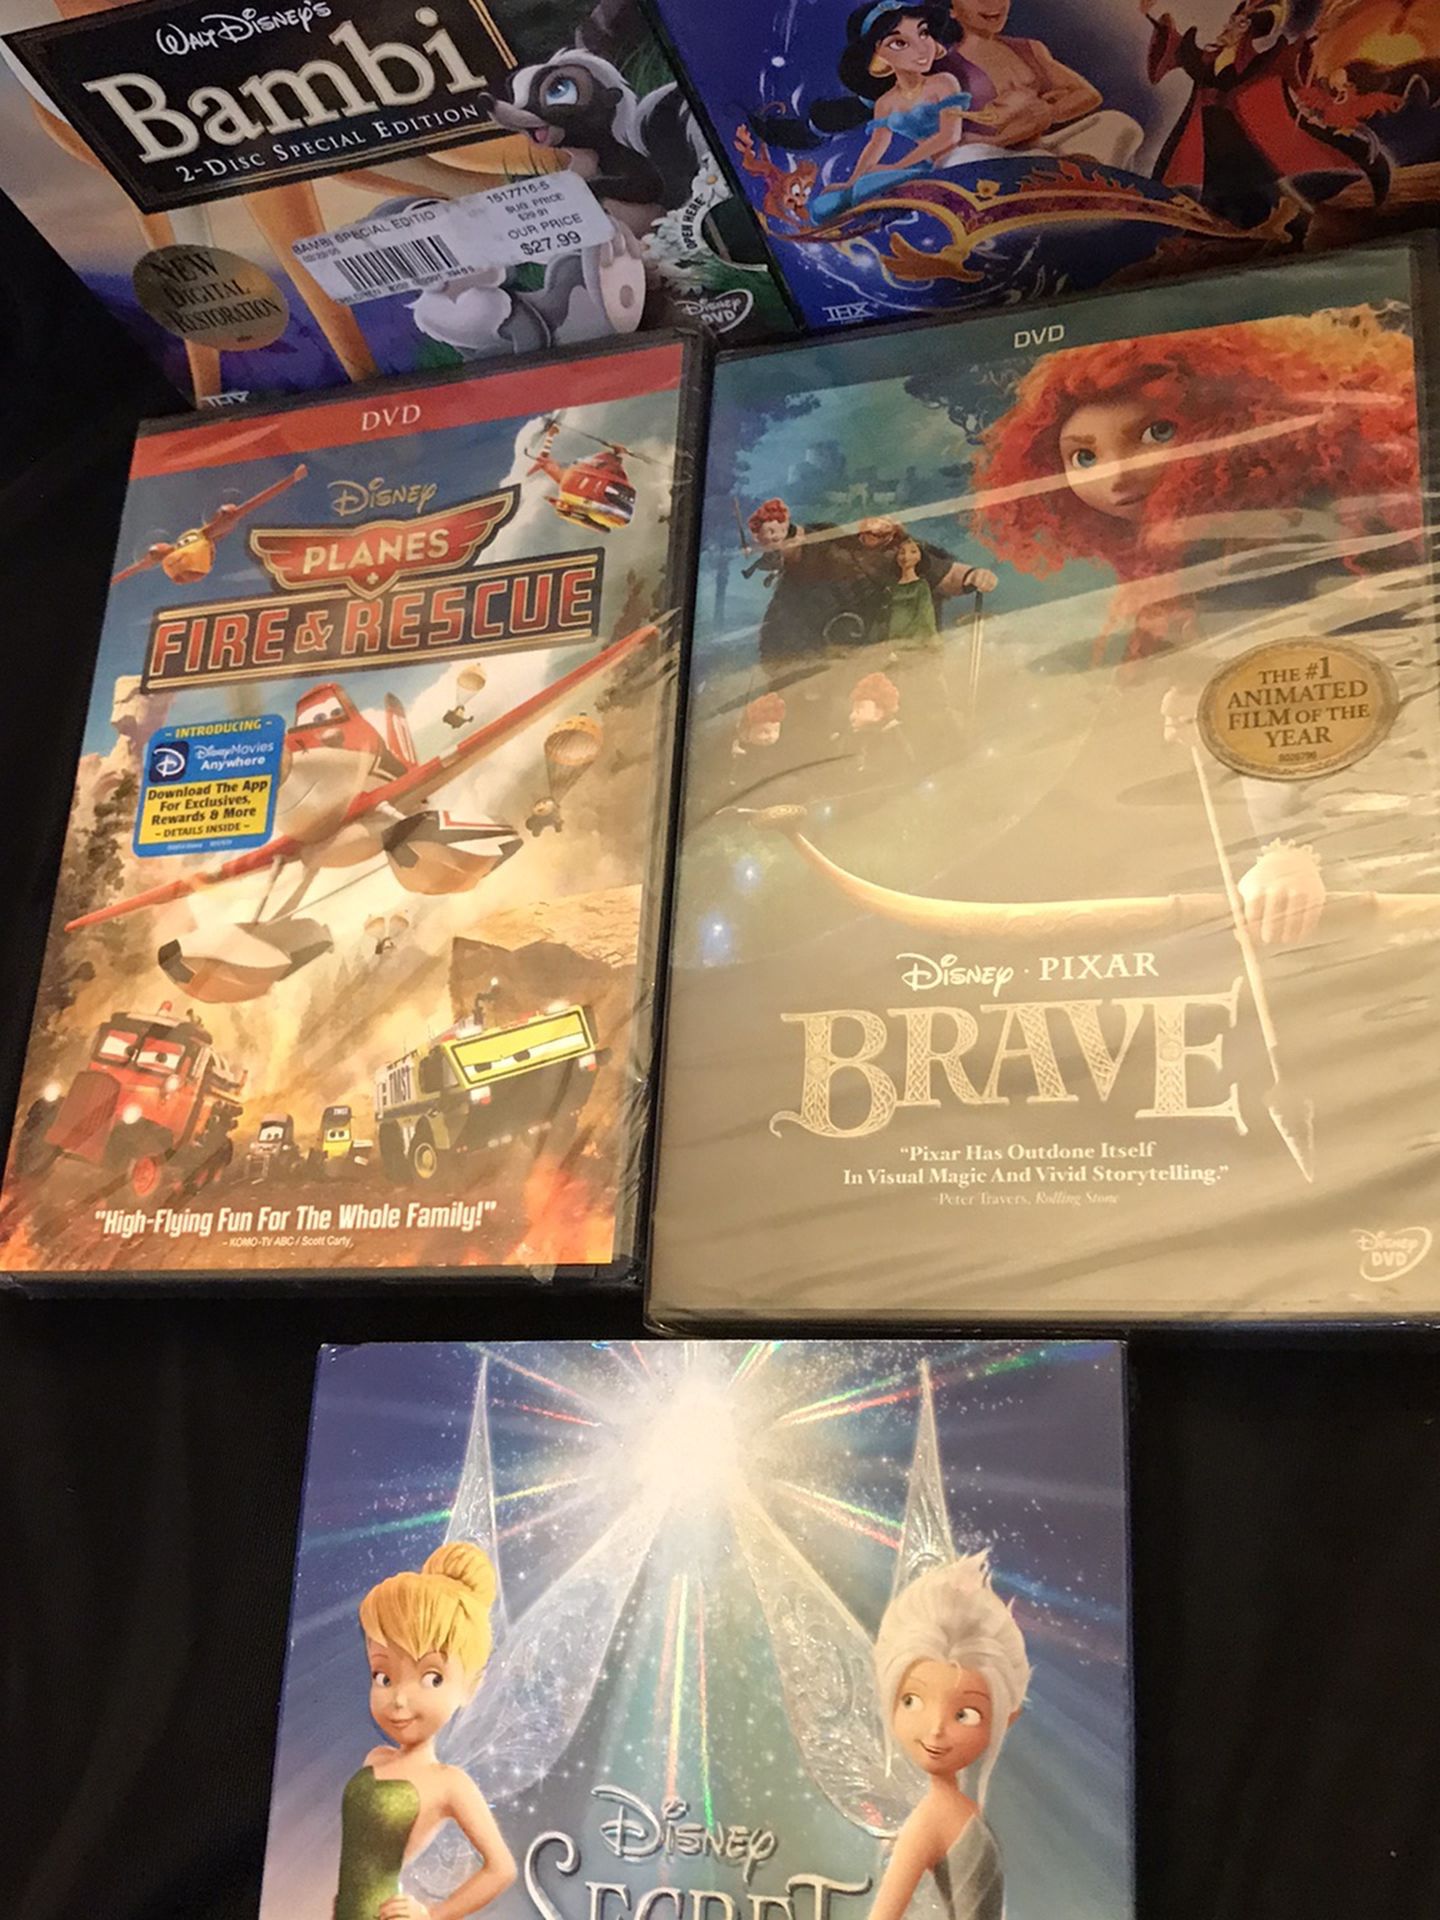 NEW in Plastic Disney Movies Blu Ray And DVD Combos Secret Of Wings Planes Fire & Rescue Brave Aladdin Bambi And Over 100 Christmas Gift Present  